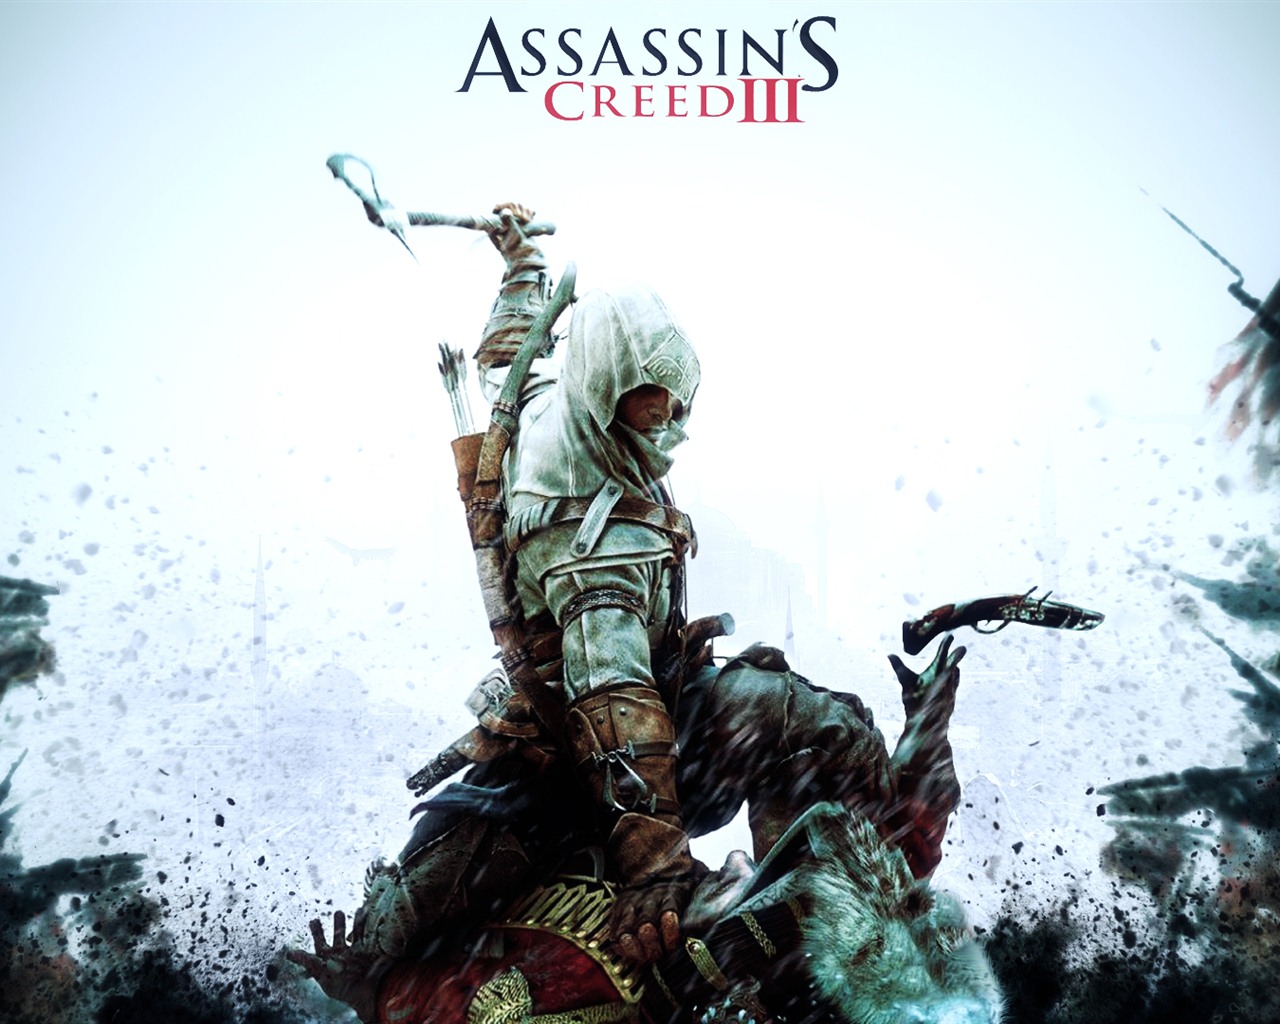 Assassin's Creed 3 HD wallpapers #15 - 1280x1024